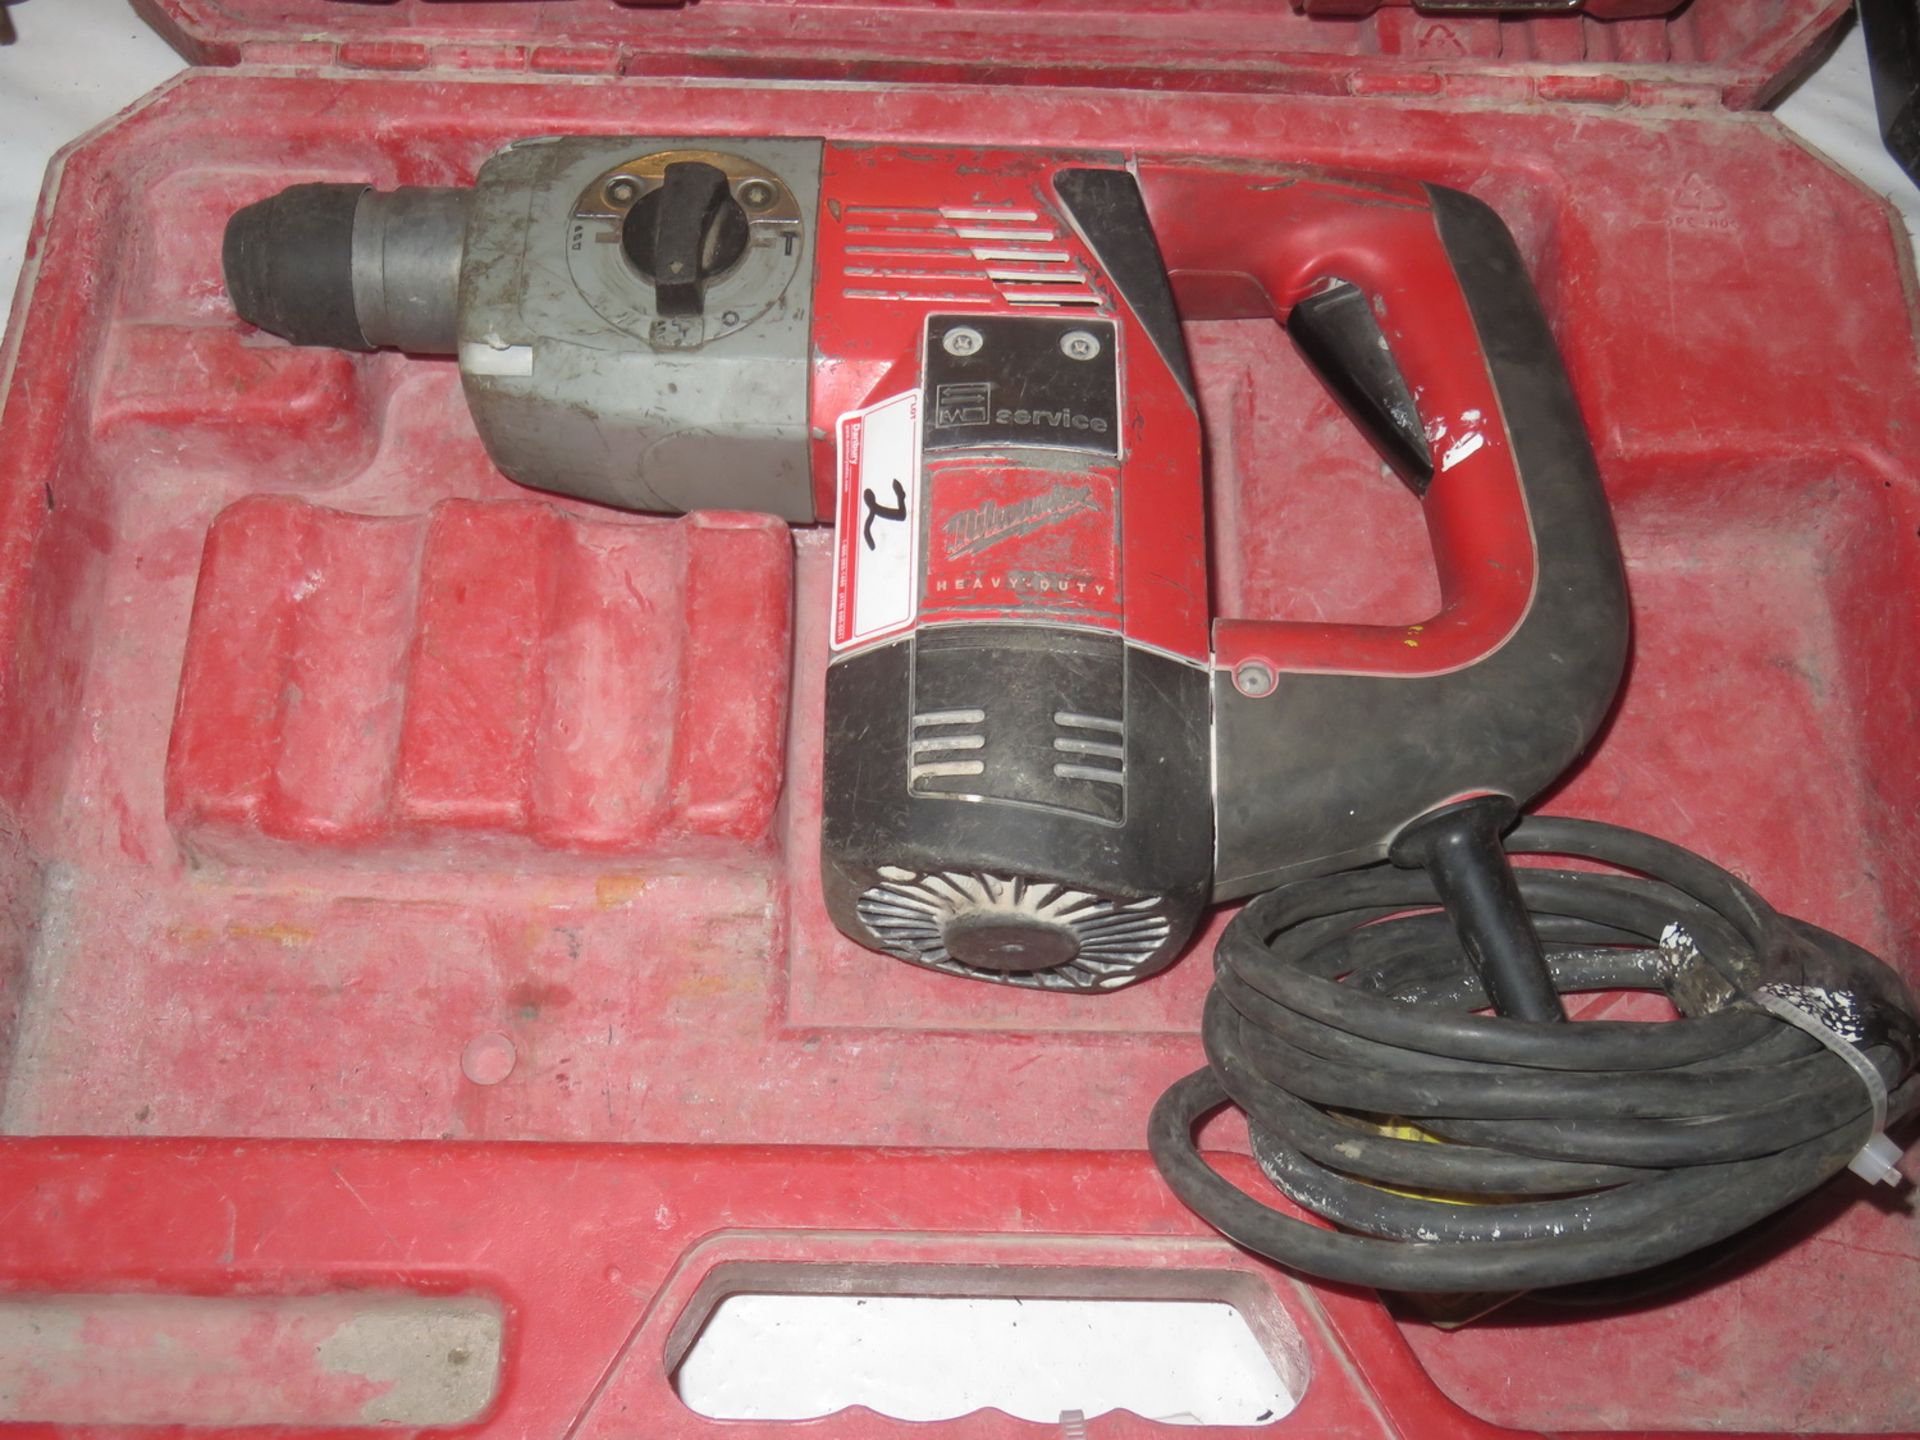 MILWAUKEE MOD 5359-21, 1 1/8" ELECTRIC ROTARY HAMMER DRILL W/ CASE